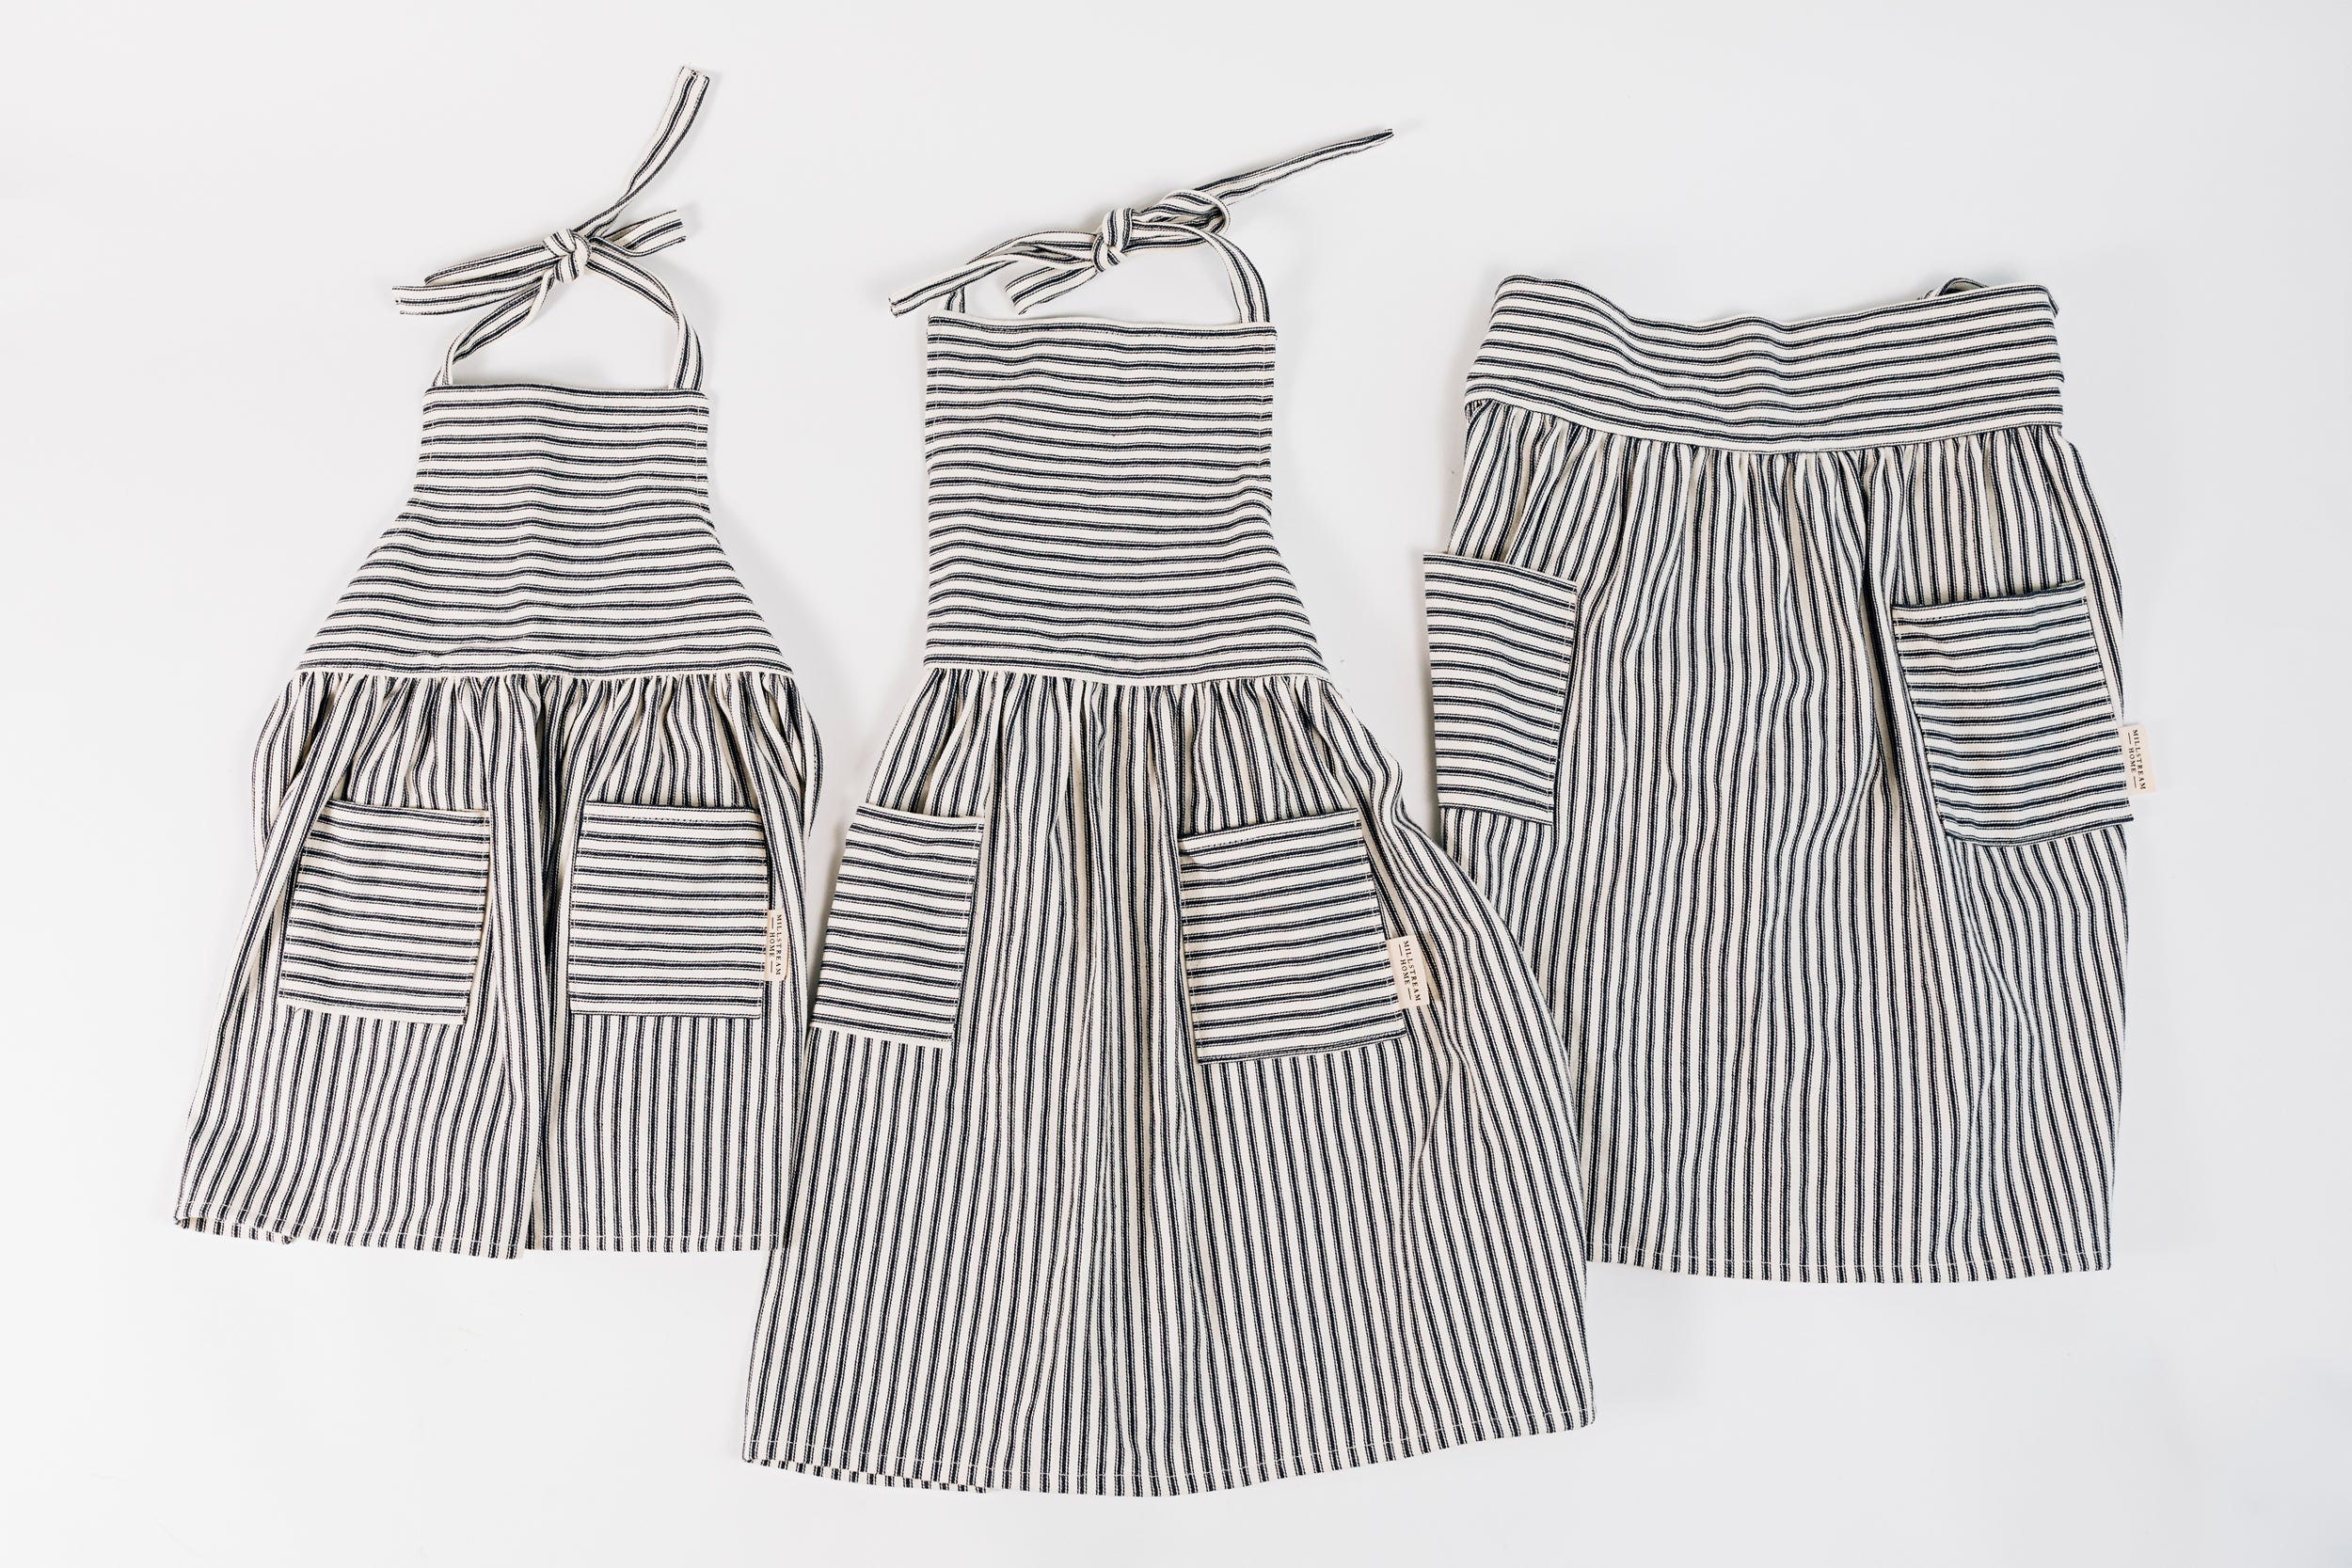 The Child's Ticking Apron Next to Two Adult Aprons